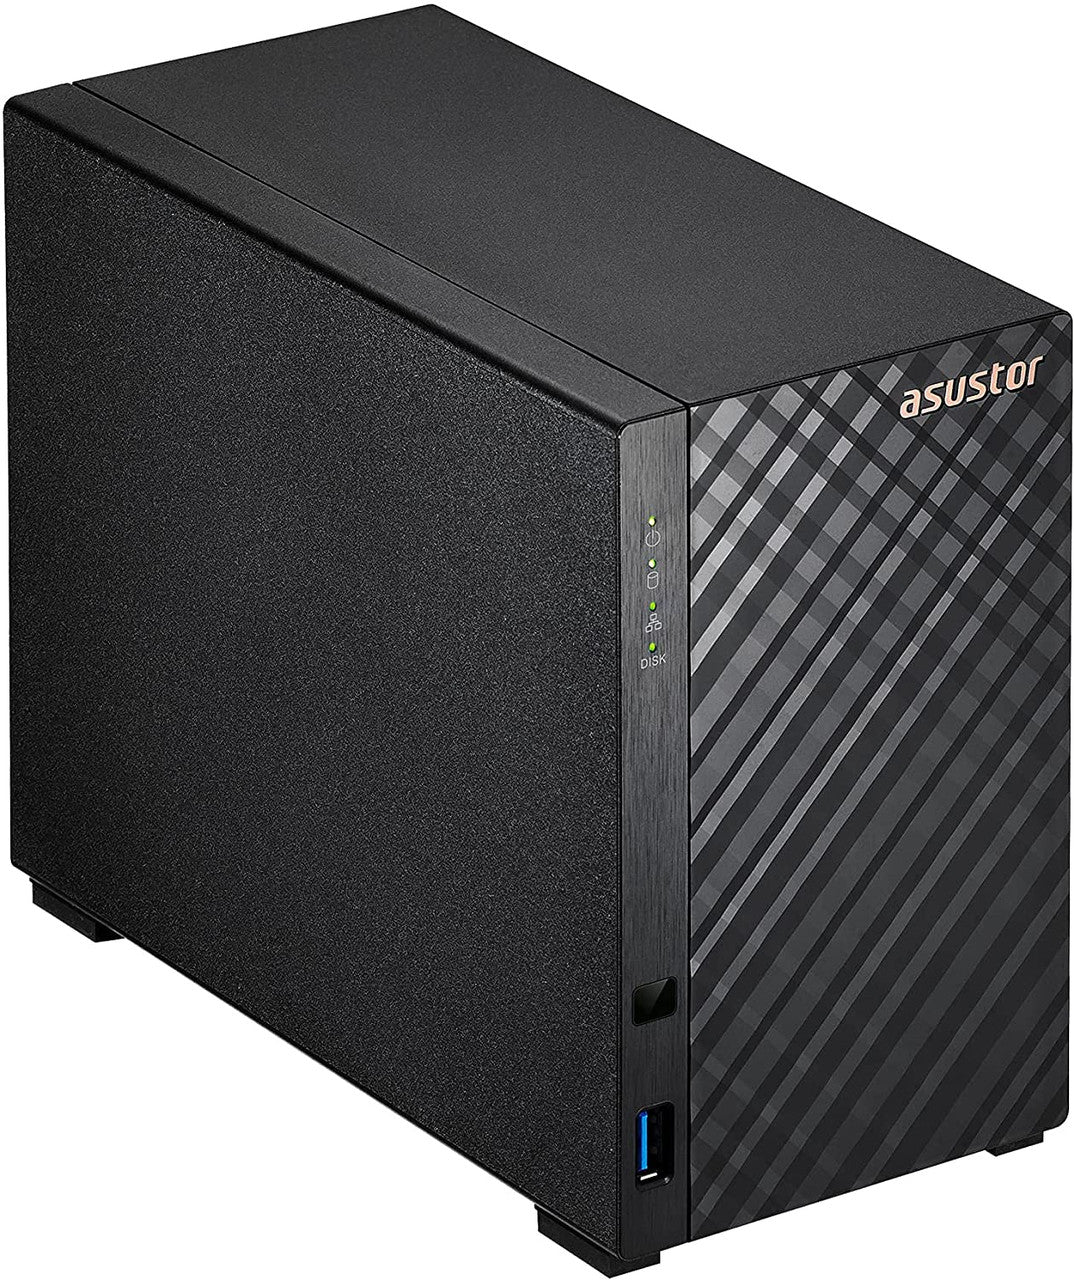 Asustor AS1102T 2-Bay Drivestor 2 NAS with 1GB RAM and 20TB (2x10TB) Western Digital RED Plus Drives